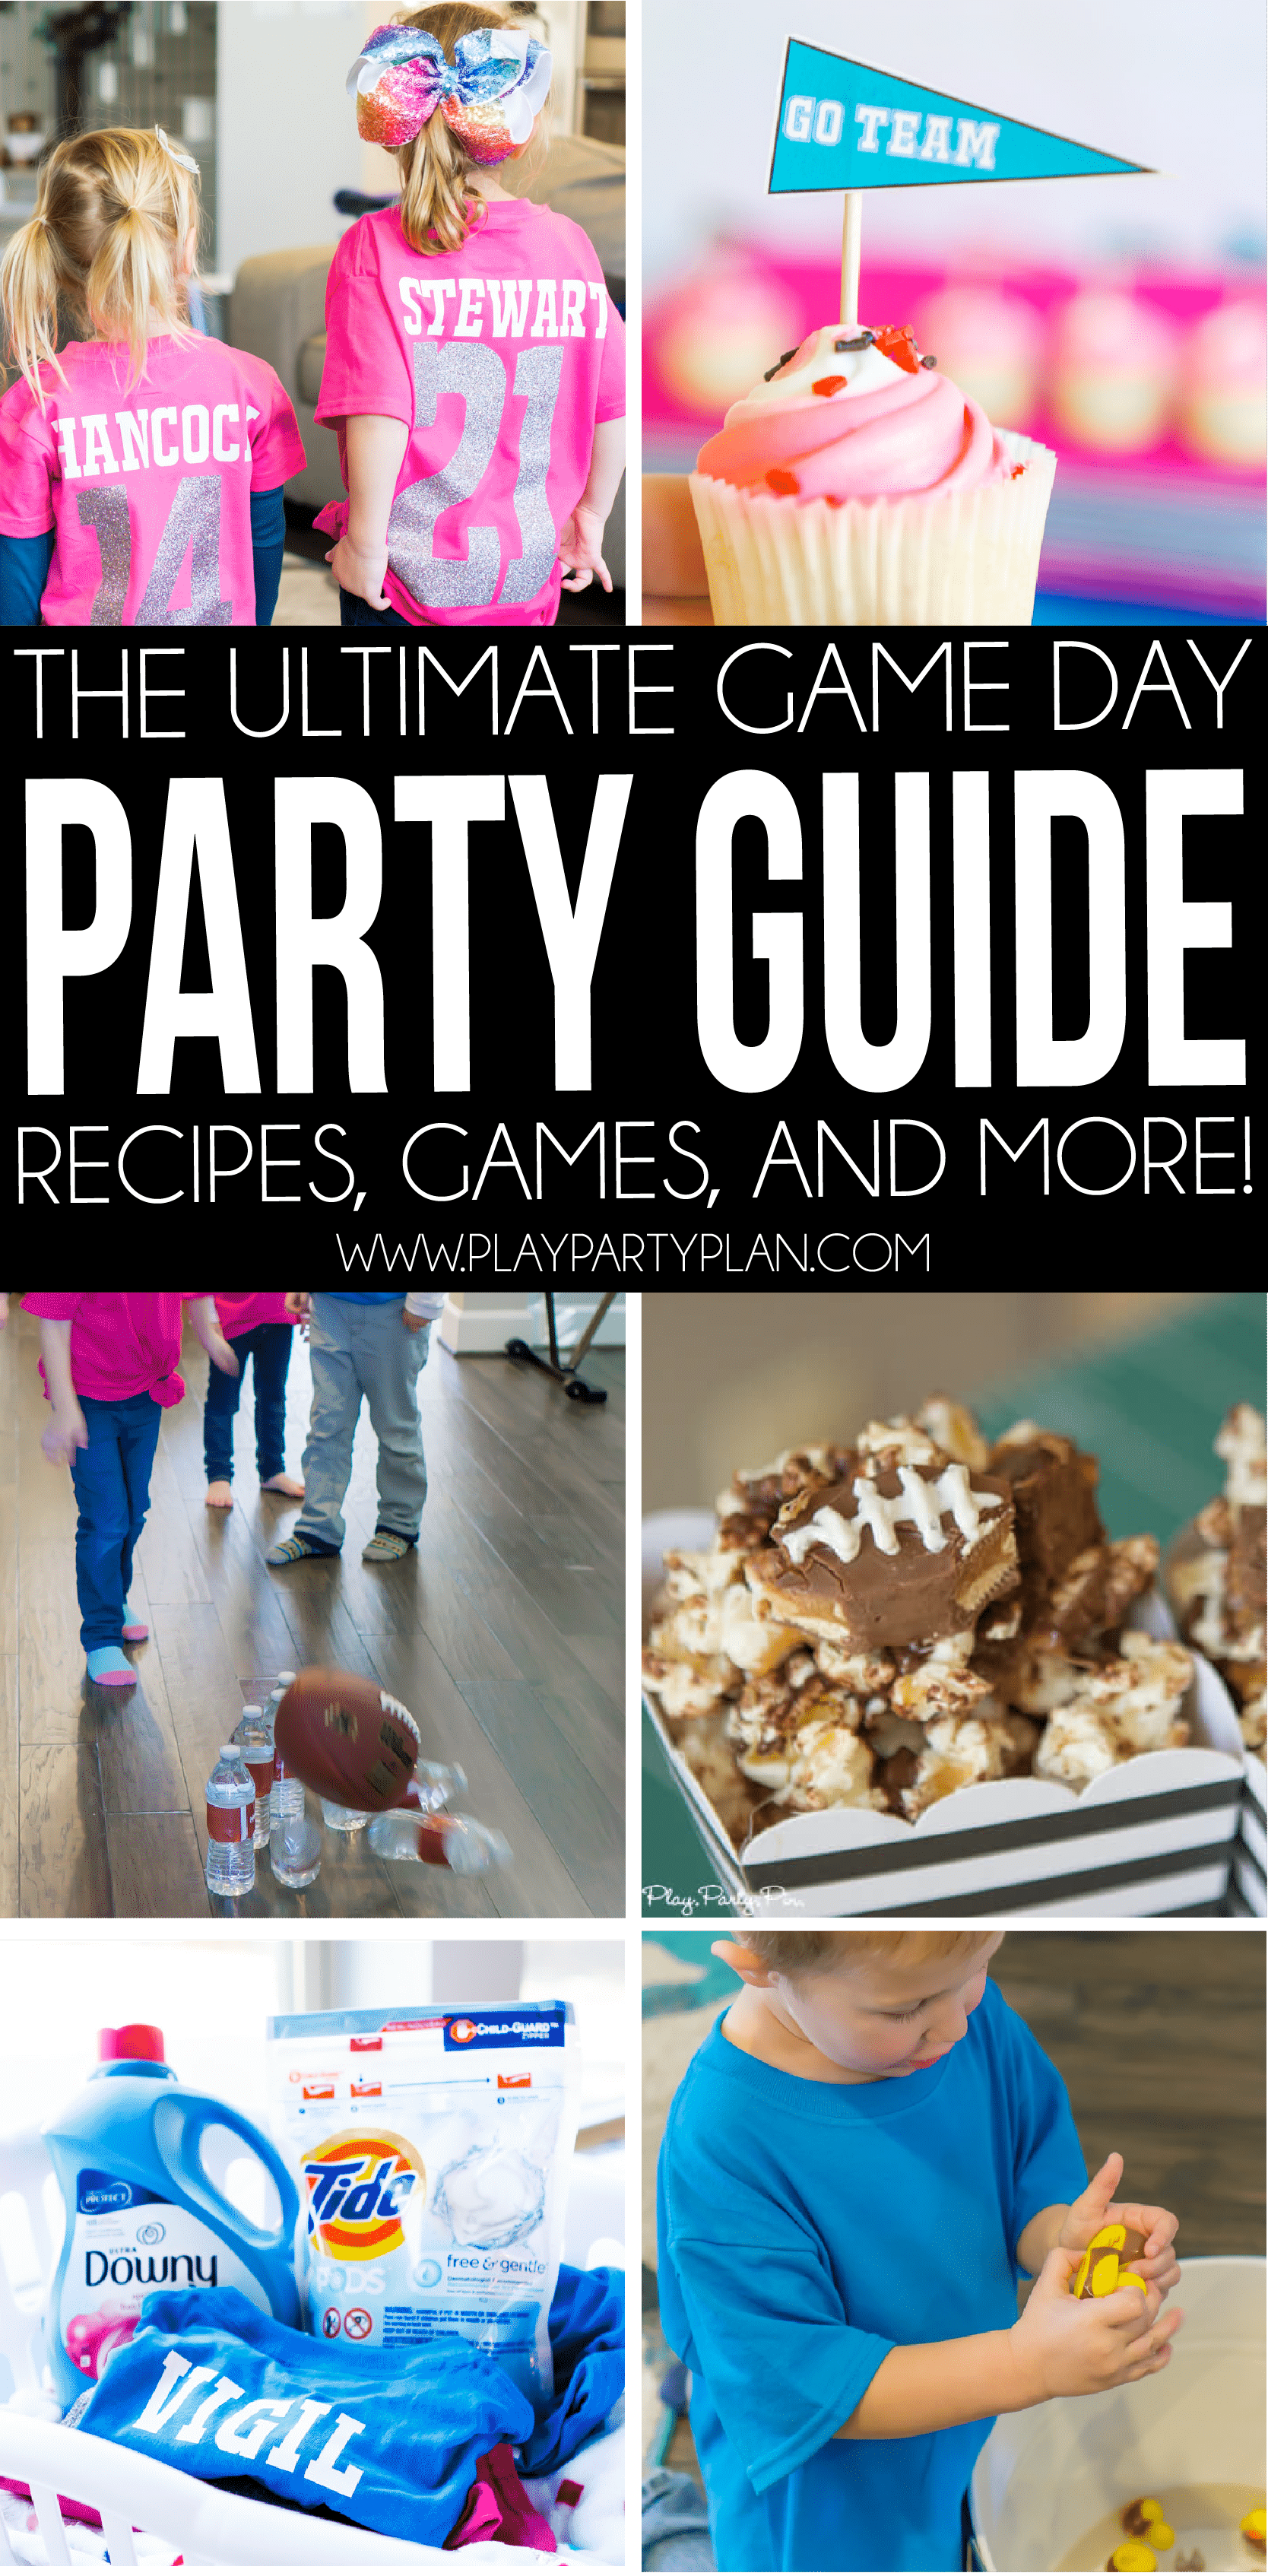 How to Throw a Touchdown of a Game Day Party